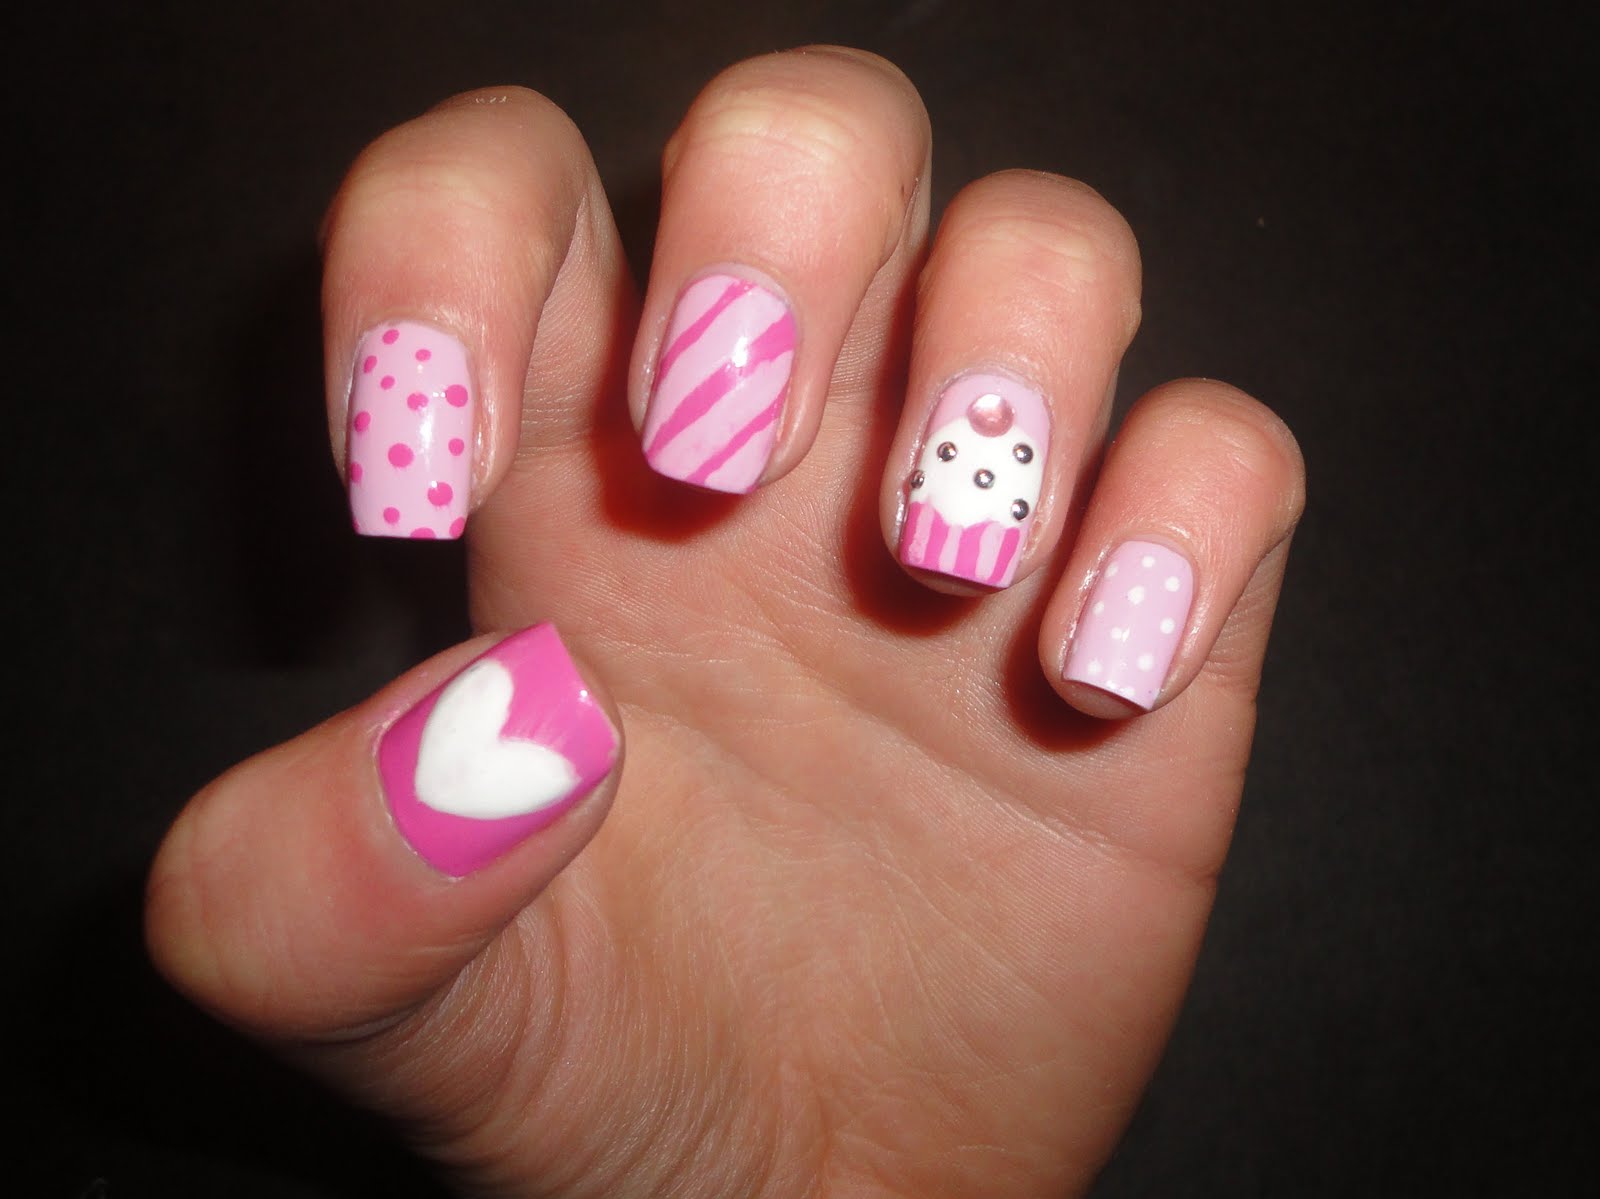 2. "Cute Nail Art Designs Compilation - wide 10